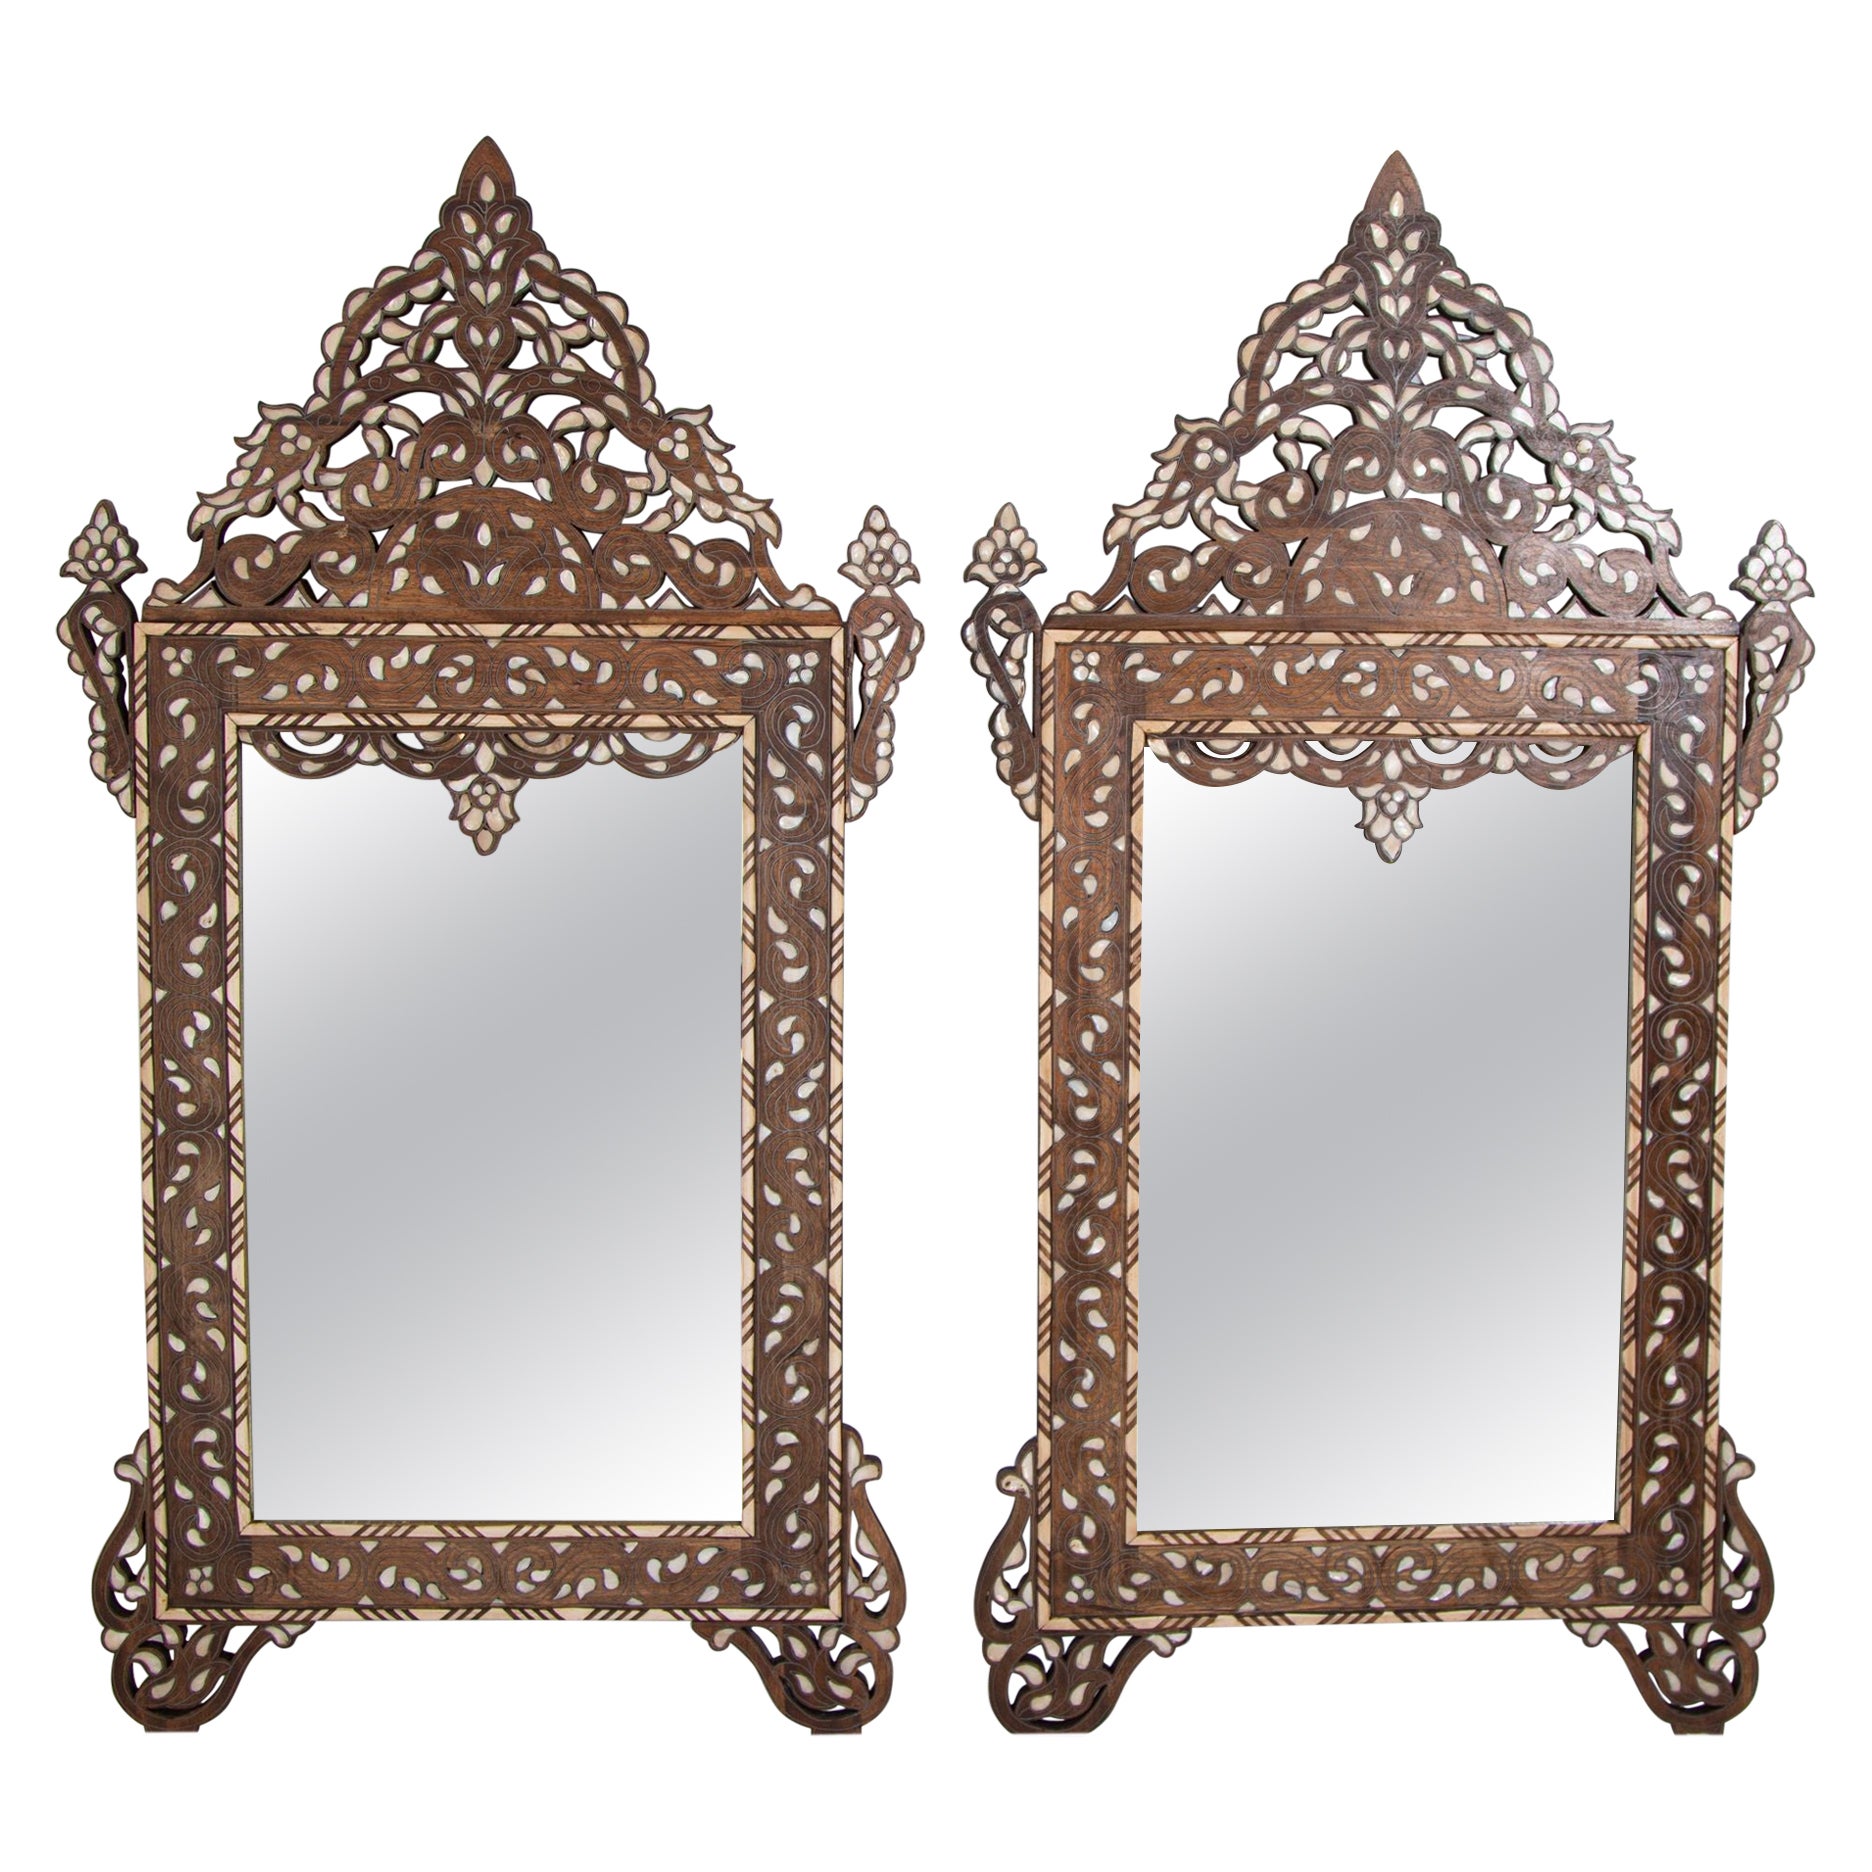 Damascene Moorish Bone Inlaid Mirrors With Floral Motif 52" H. A Pair For Sale